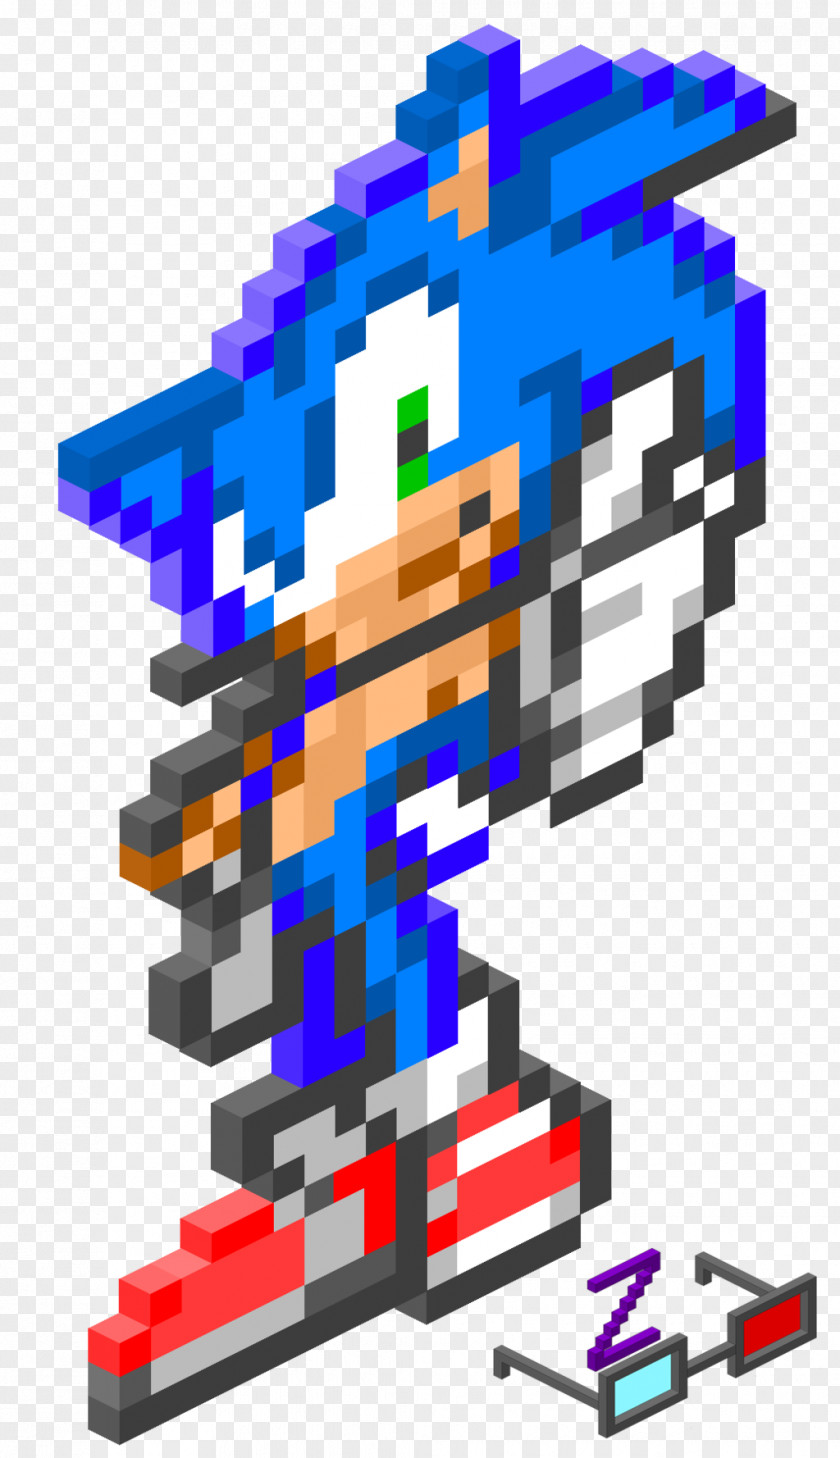 Sonic The Hedgehog Pixel Art Isometric Projection Graphics In Video Games And Binding Of Isaac PNG